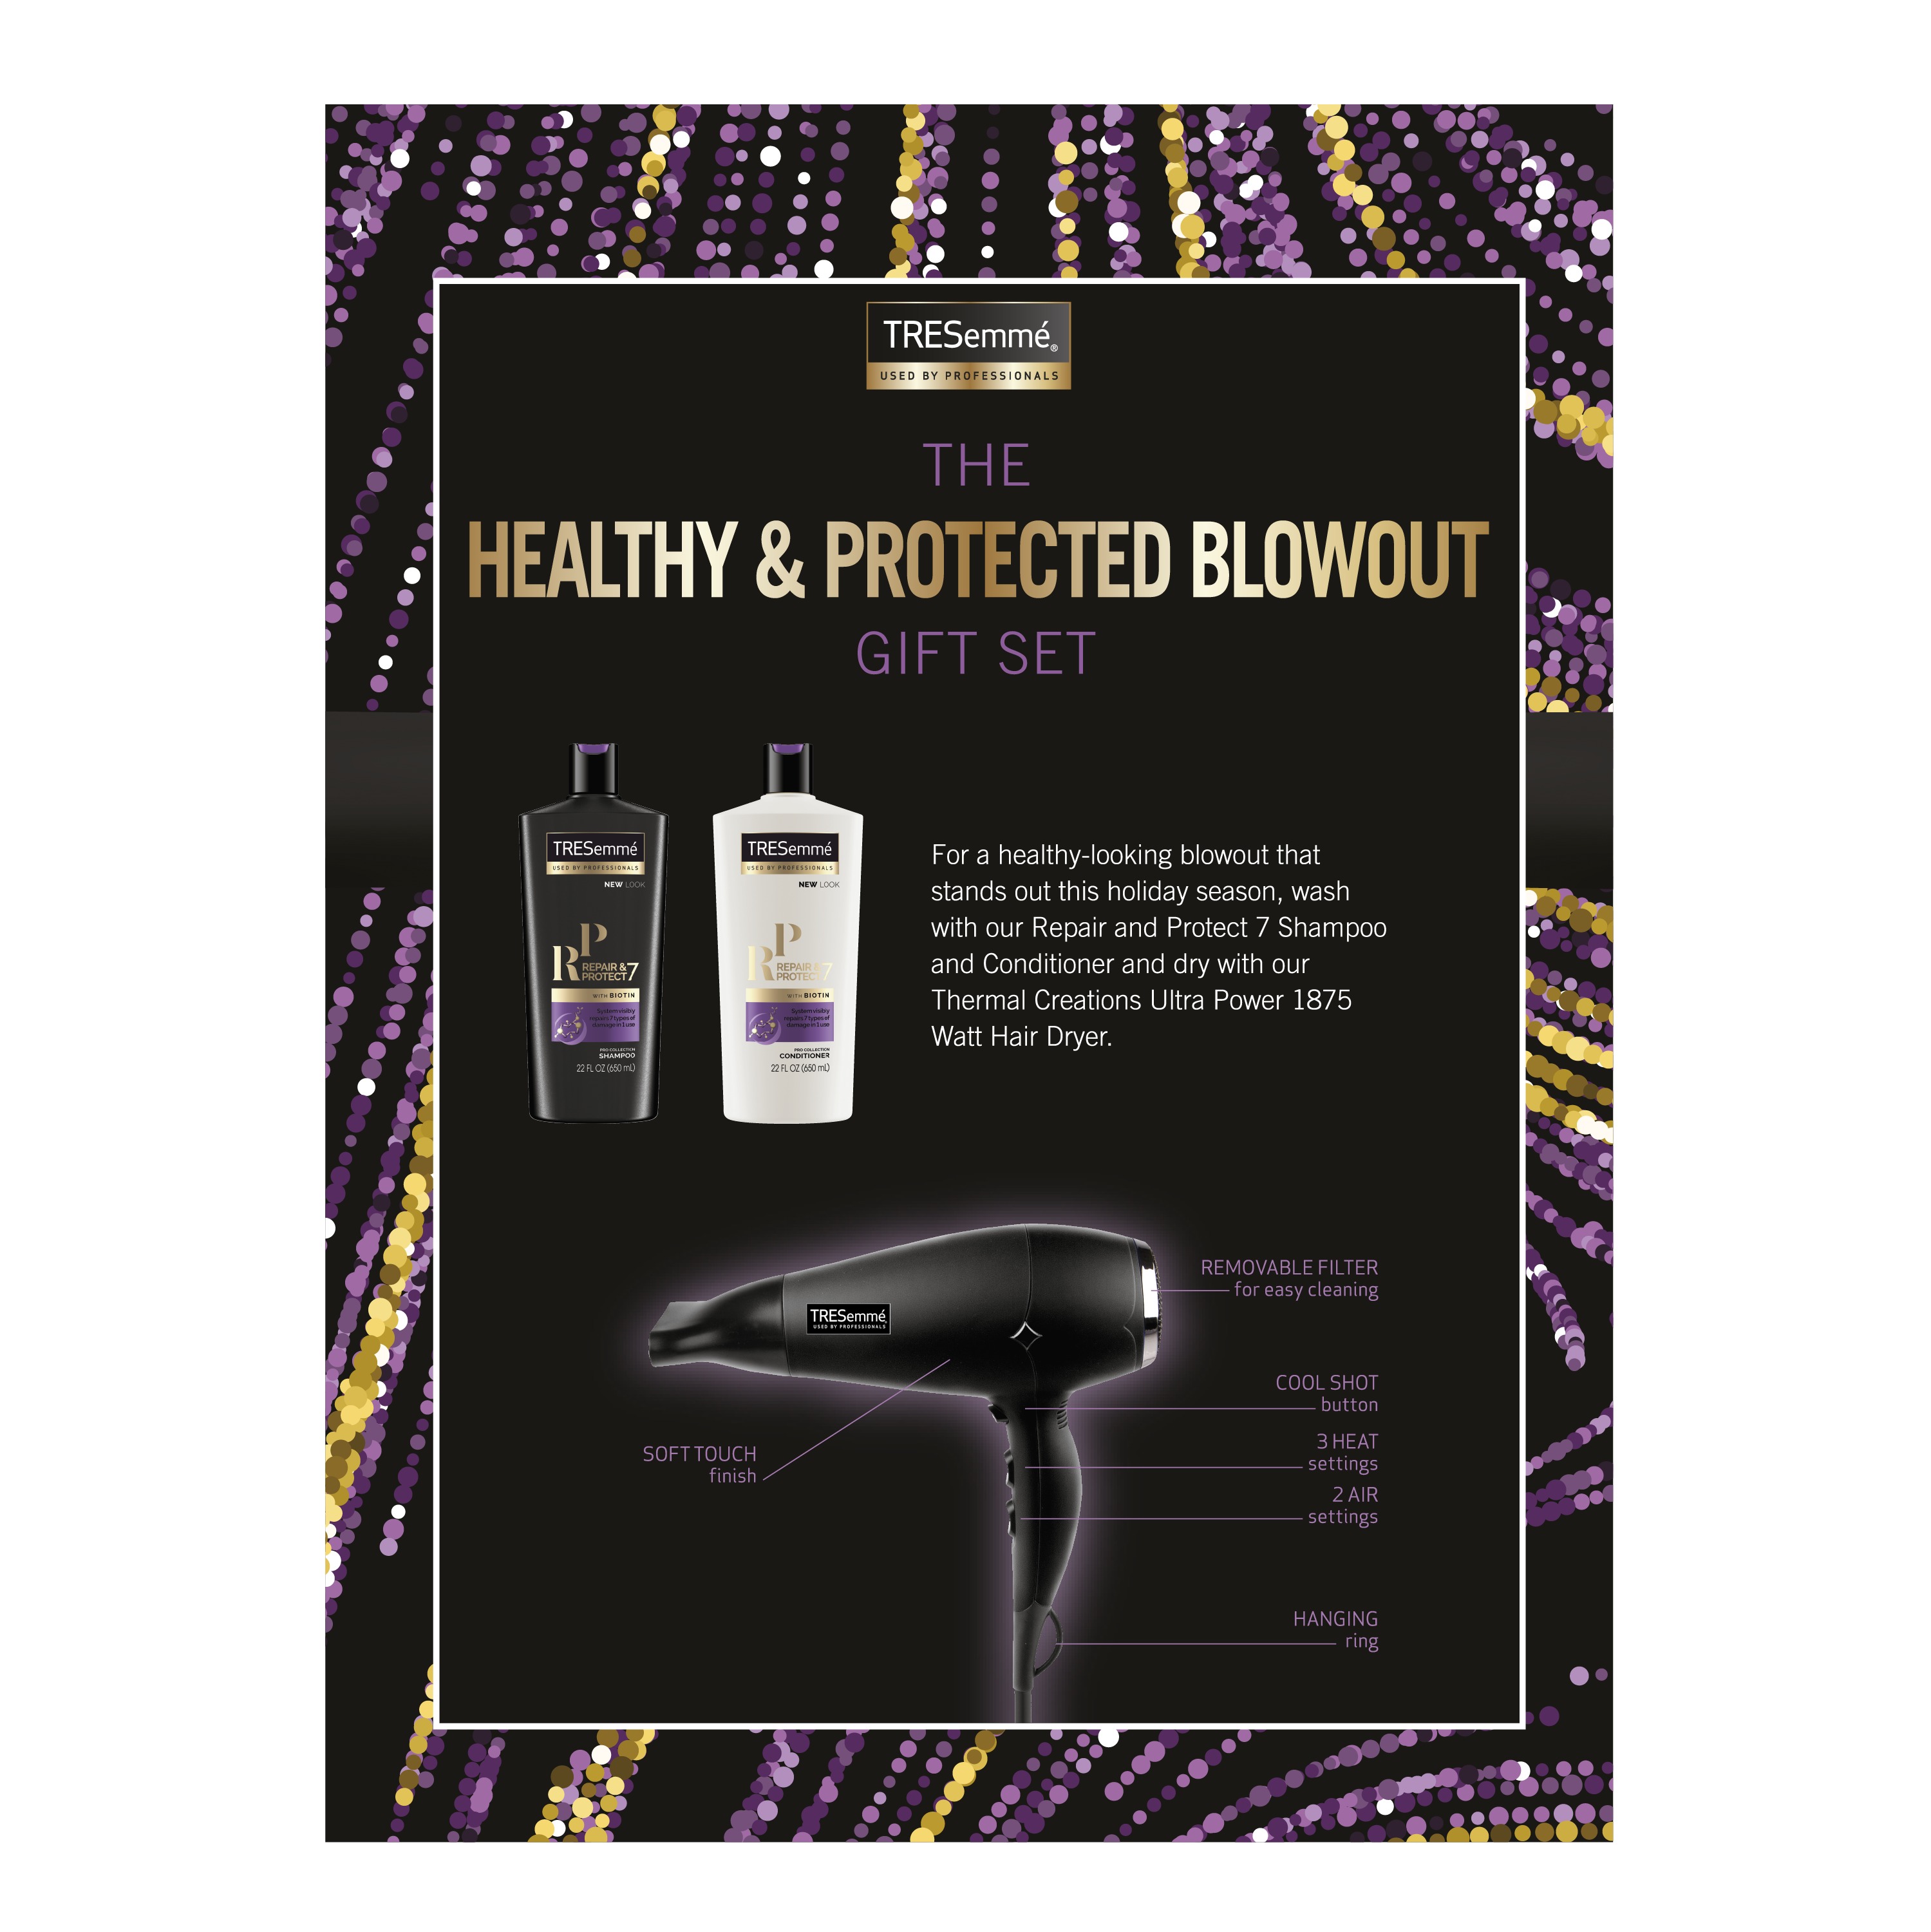 TRESemme 3-Pc Healthy & Protected Blowout Gift Set Repair and Protect with Hair Dryer (Shampoo, Conditioner) ($24.84 Value) - image 10 of 11